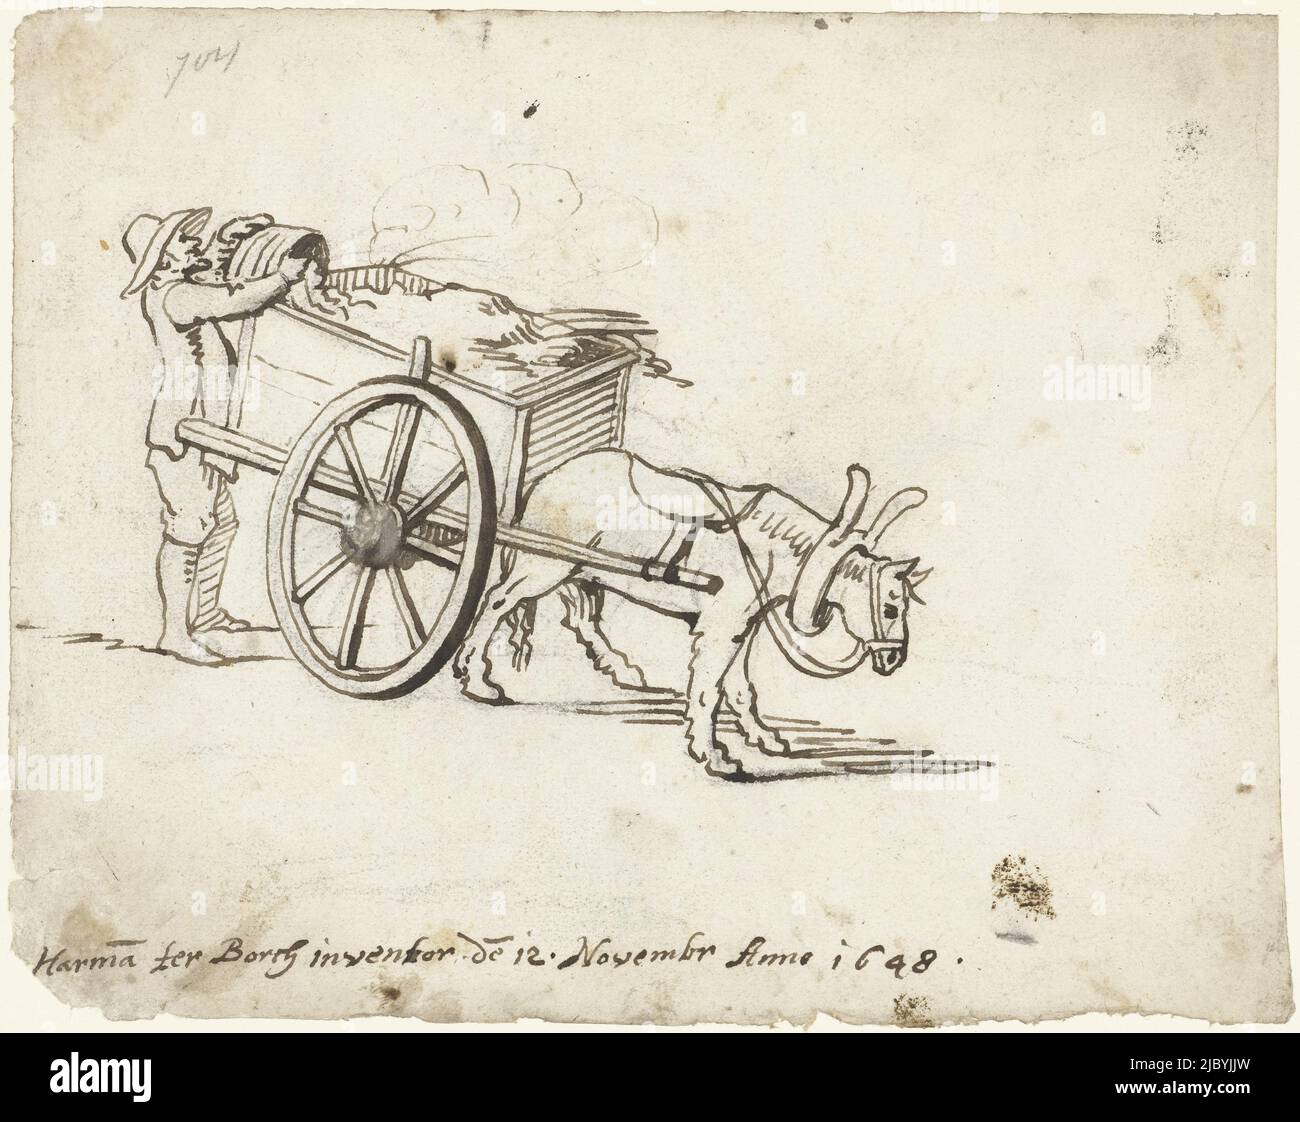 Man loading manure onto a cart, Harmen ter Borch, 1648, Man loading manure onto a cart with a horse in front., draughtsman: Harmen ter Borch, (mentioned on object), Zwolle, 12-Nov-1648, paper, h 169 mm × w 212 mm Stock Photo